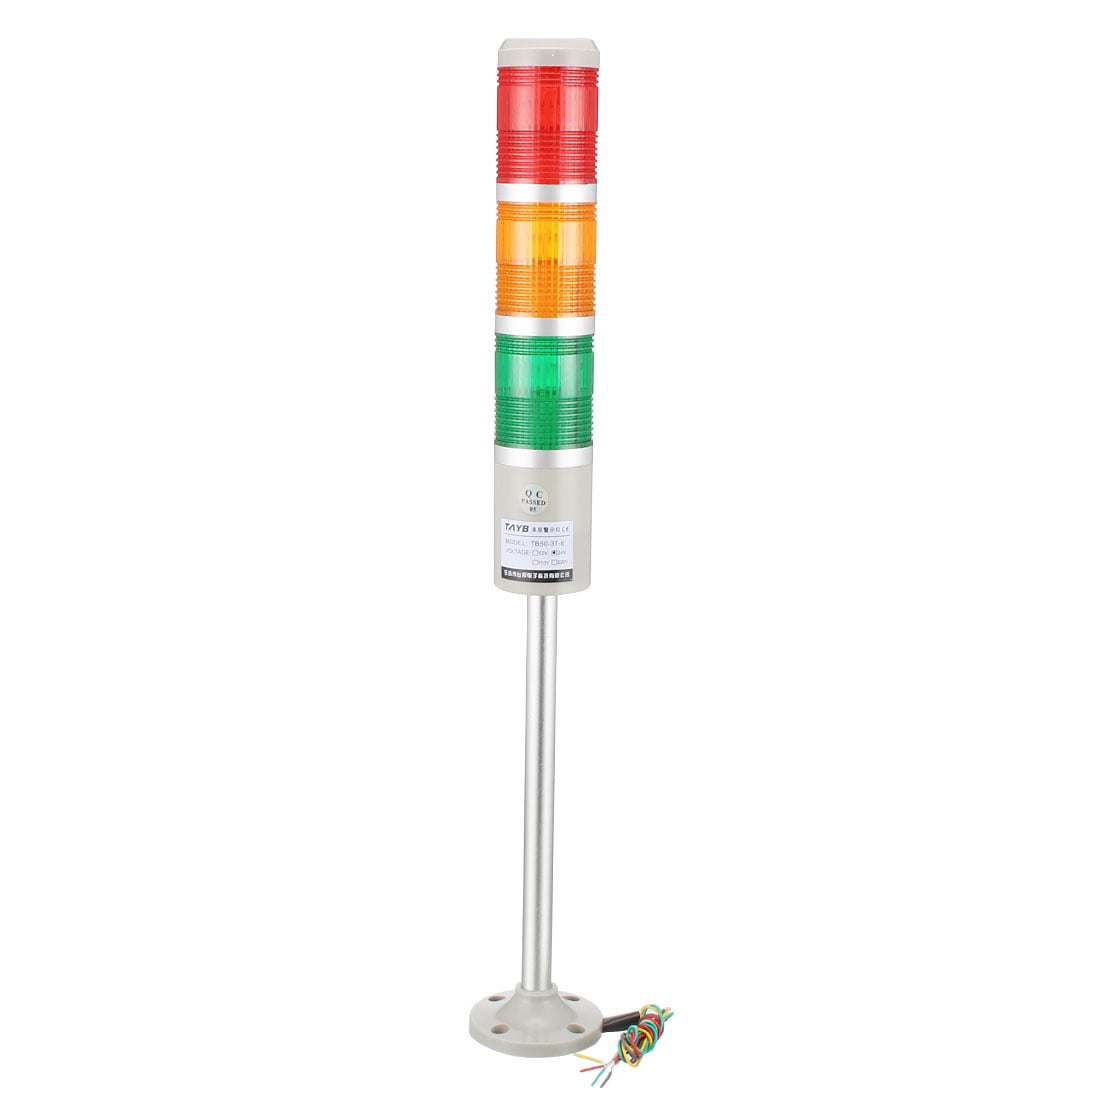 uxcell Warning Light Bulb Bright Industrial Alarm Tower Lamp DC24V Red Green Yellow TB50-3T-E